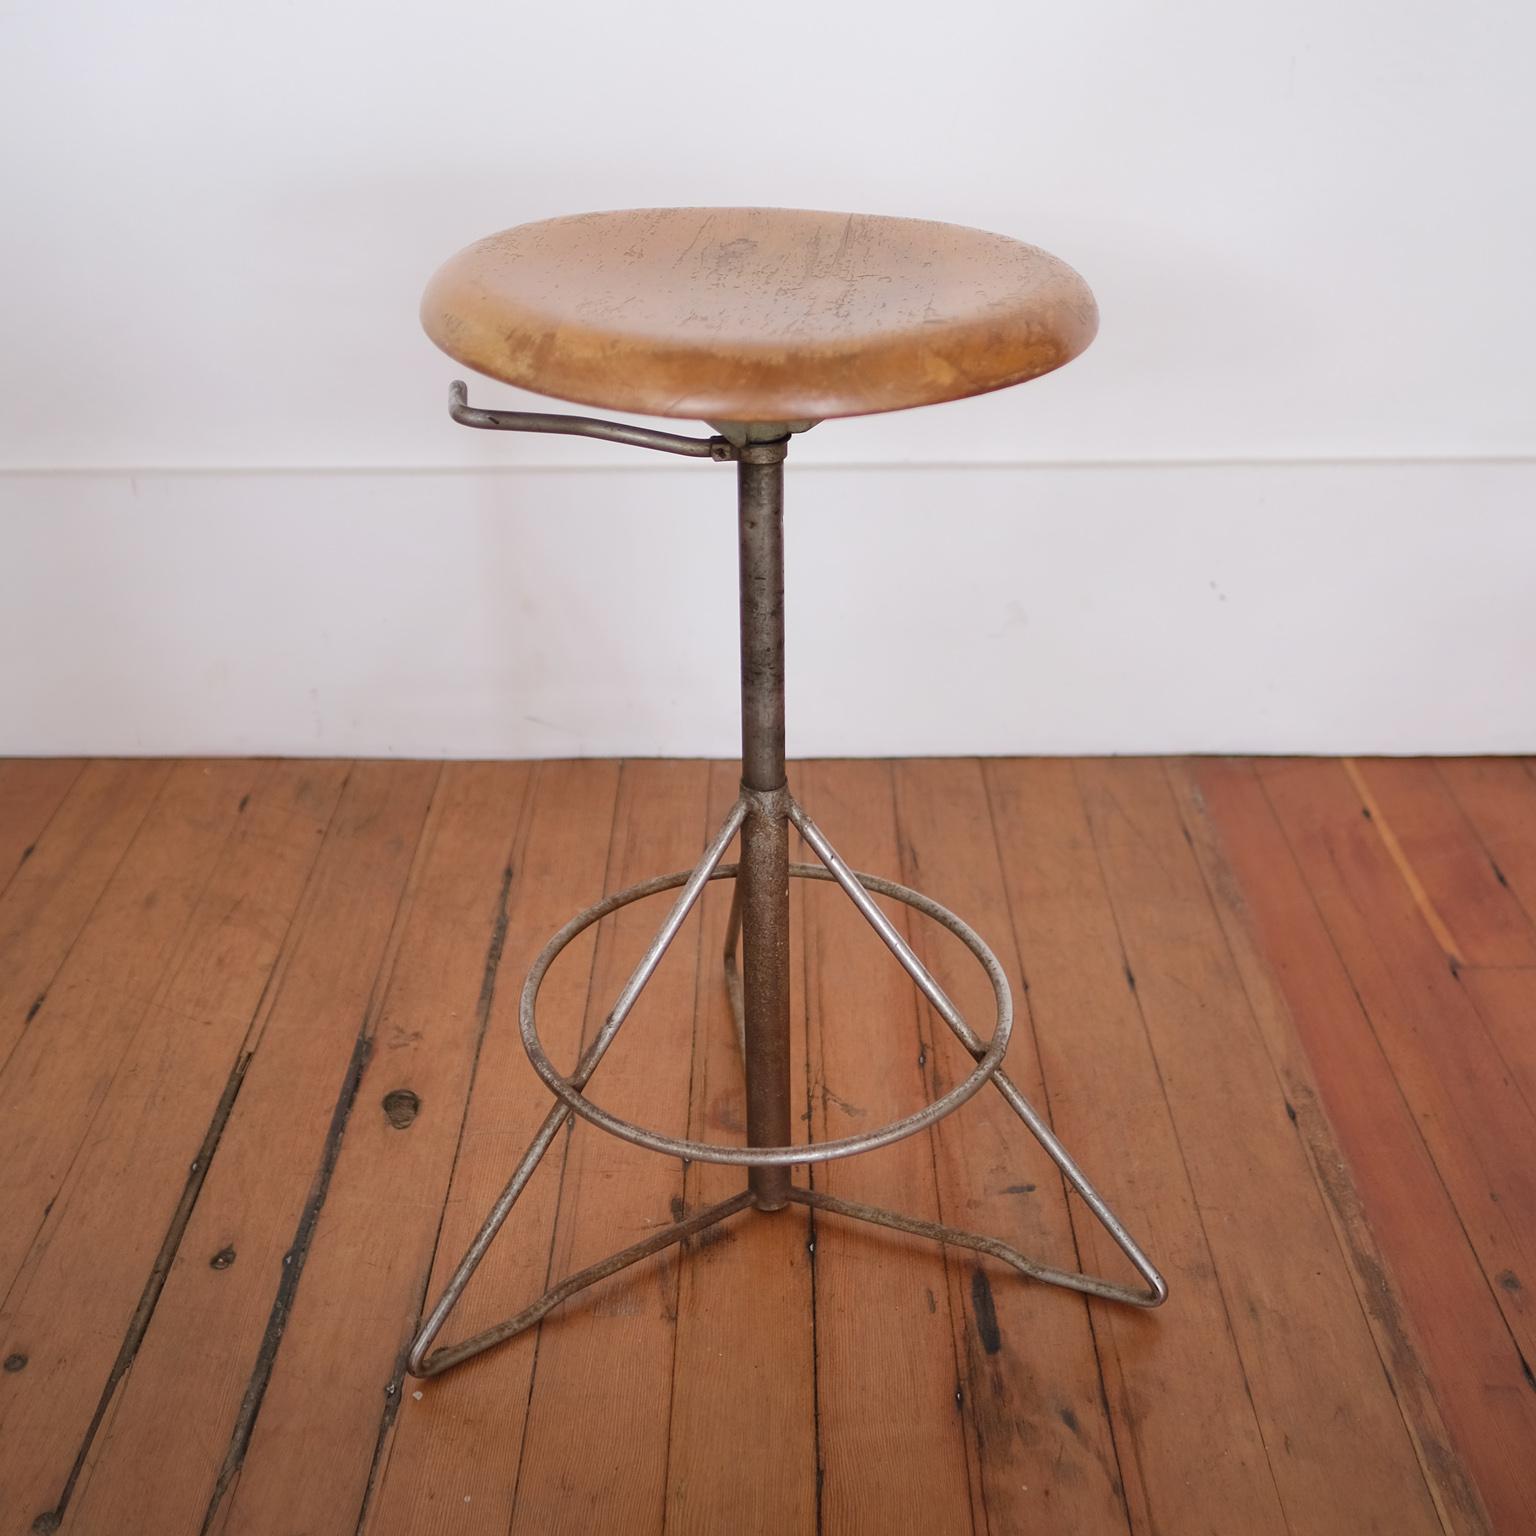 Steel Elias Svedberg Up and Down Industrial Stool Sweden, 1950s For Sale